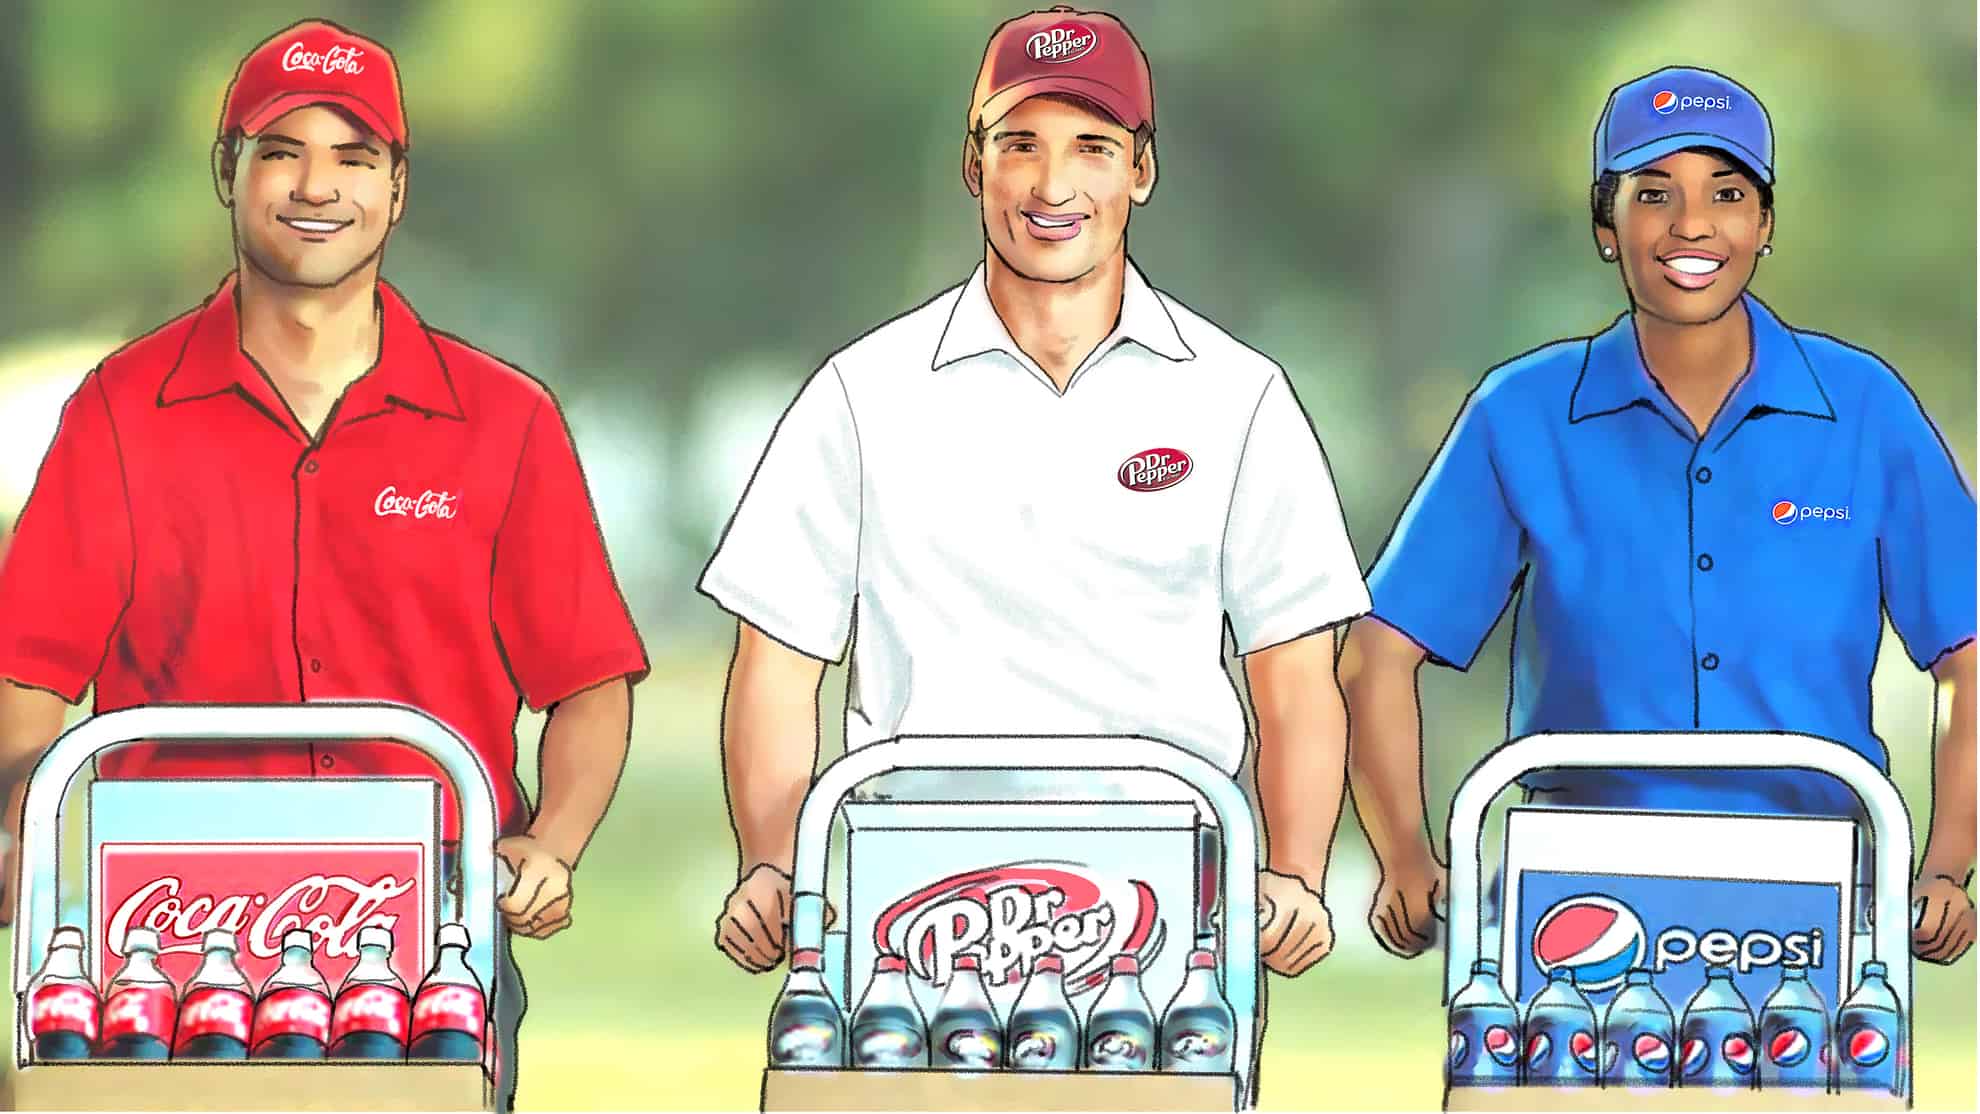 Soft drink delivery people